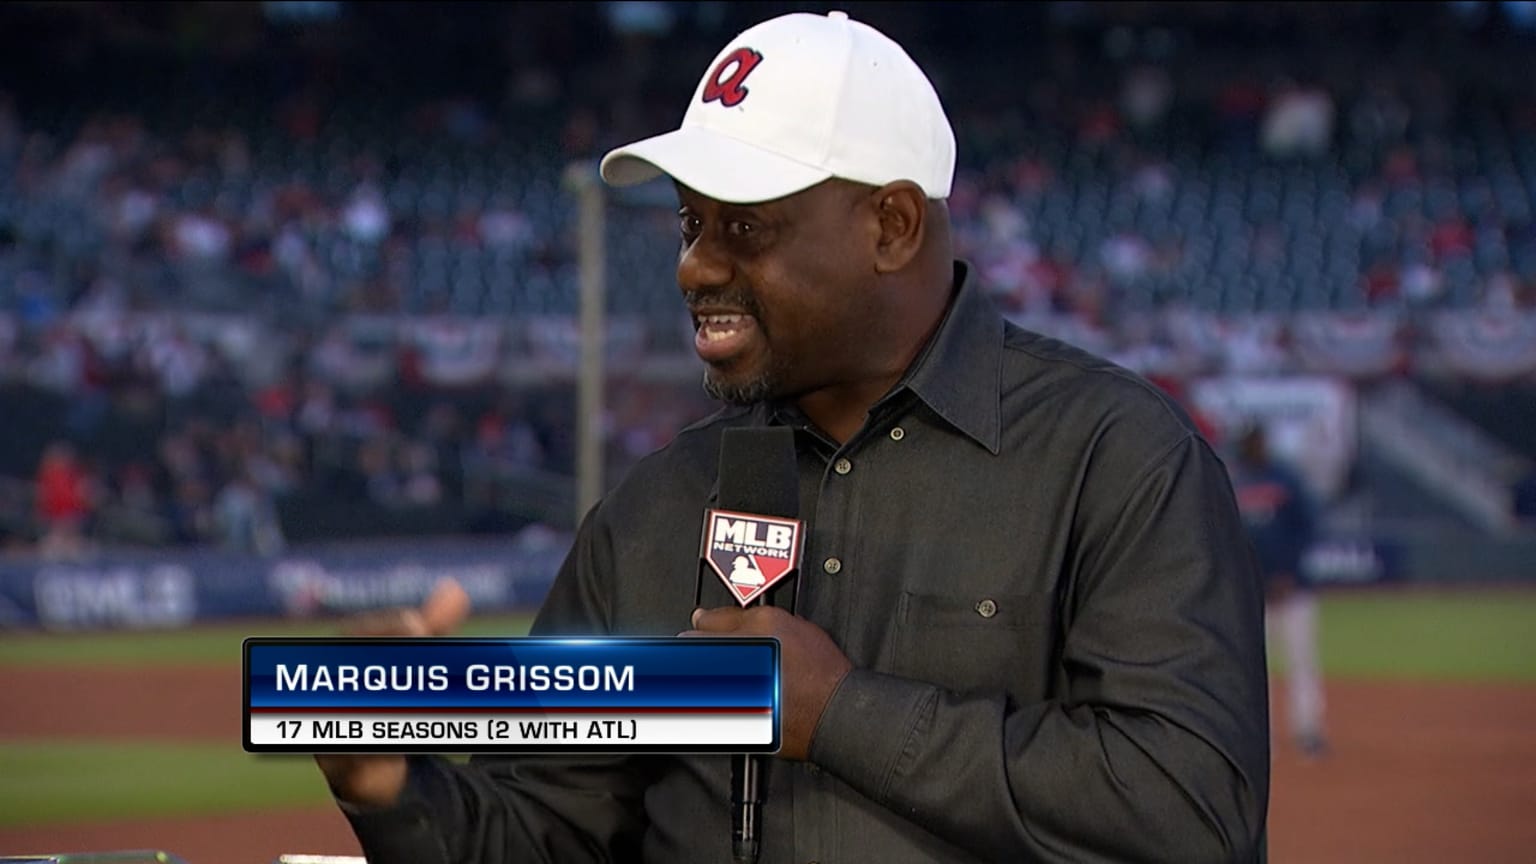 Why isn't the former MLB player Marquis Grissom a Hall of Famer? - Quora